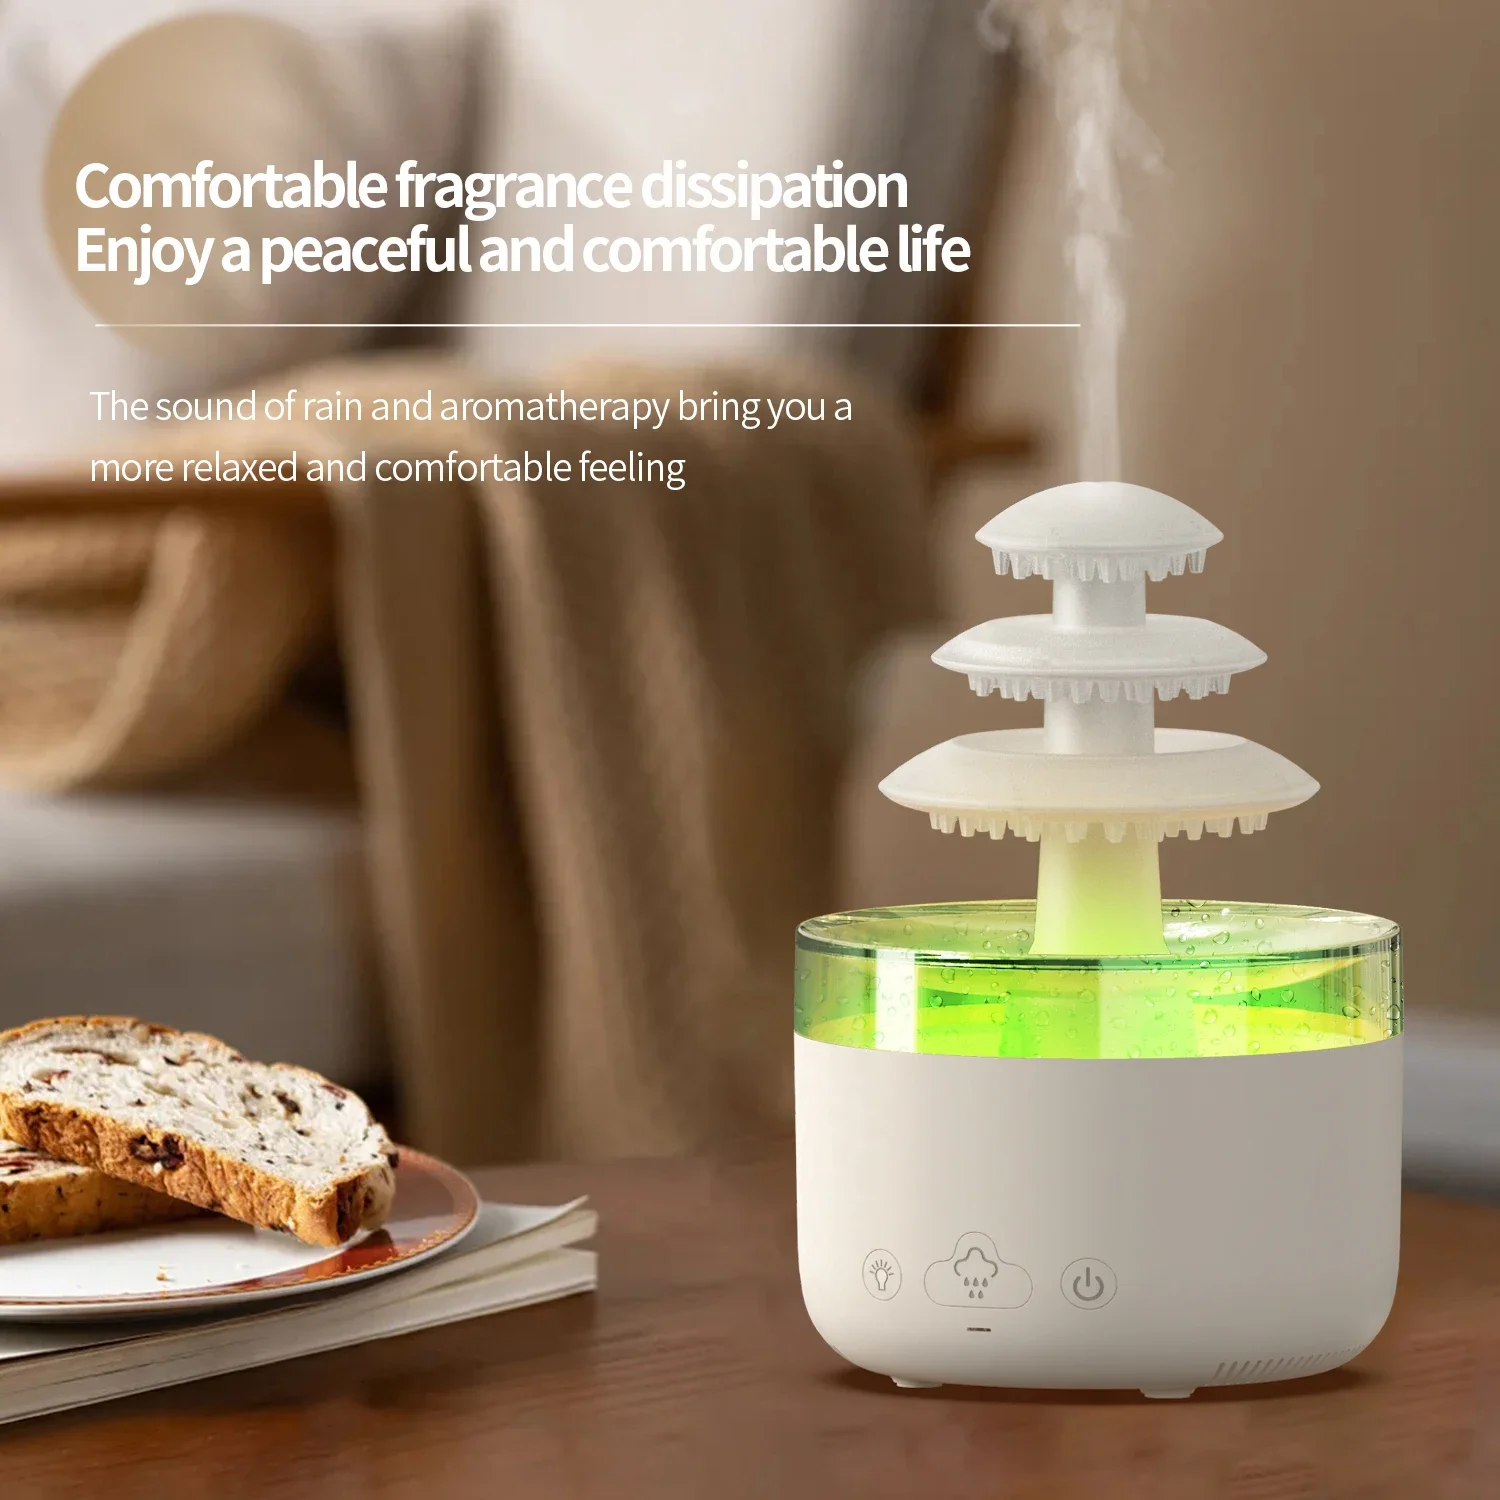 

3 Layer Cloud Rain Humidifier 500ml Essential Oil Aromatherapy Air Diffuser with Colorful Light USB Mute Mist Humidifier New